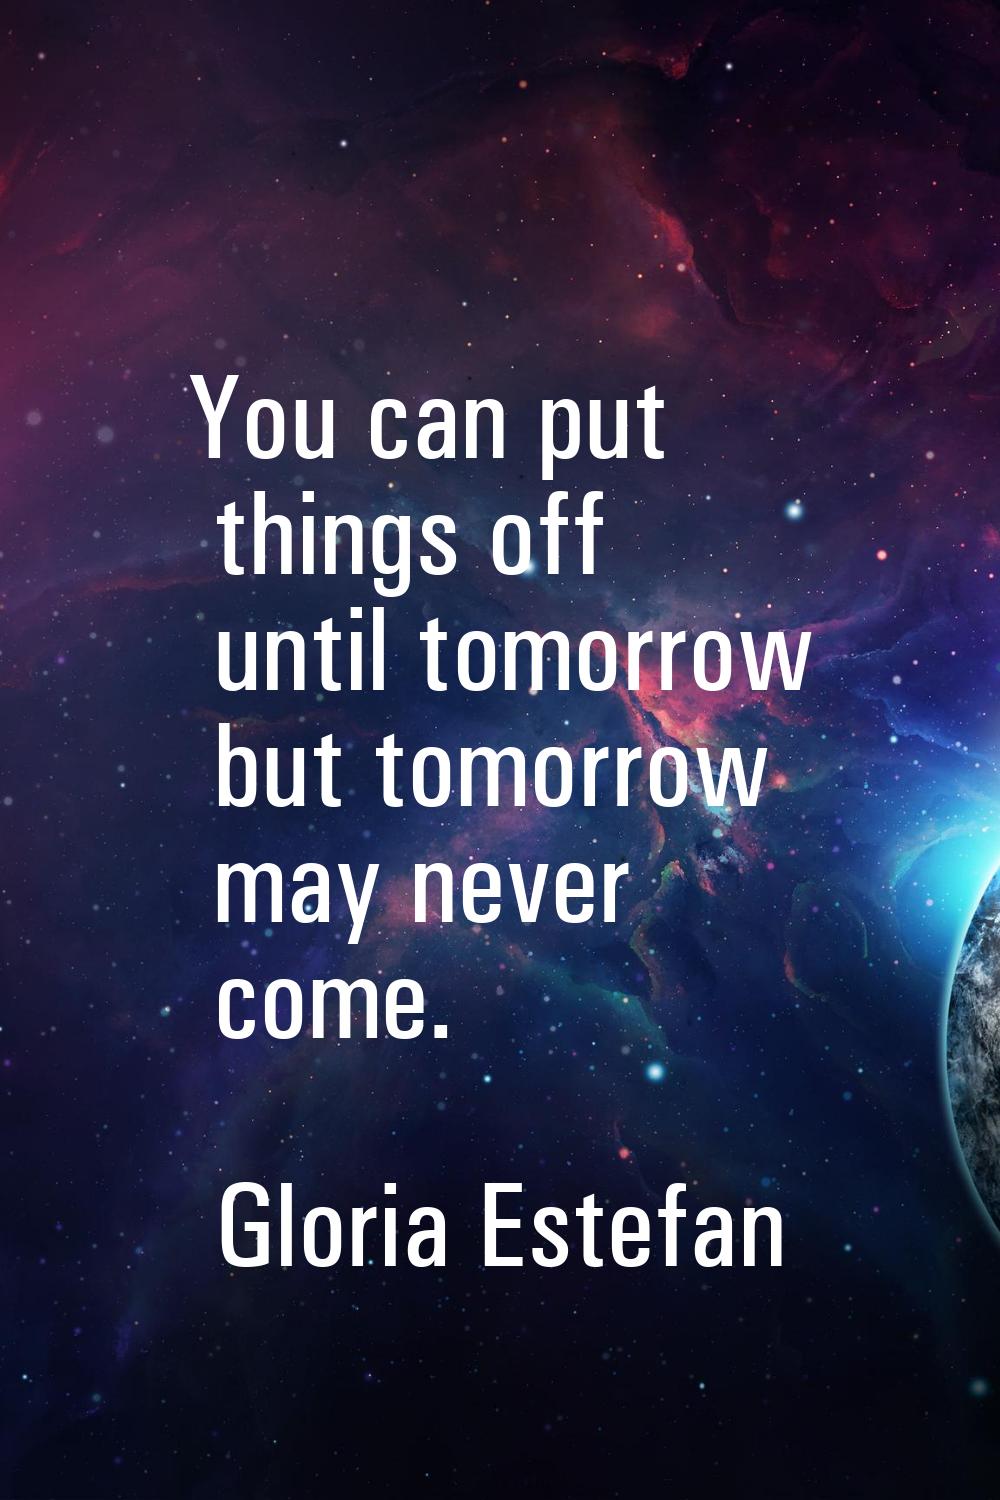 You can put things off until tomorrow but tomorrow may never come.